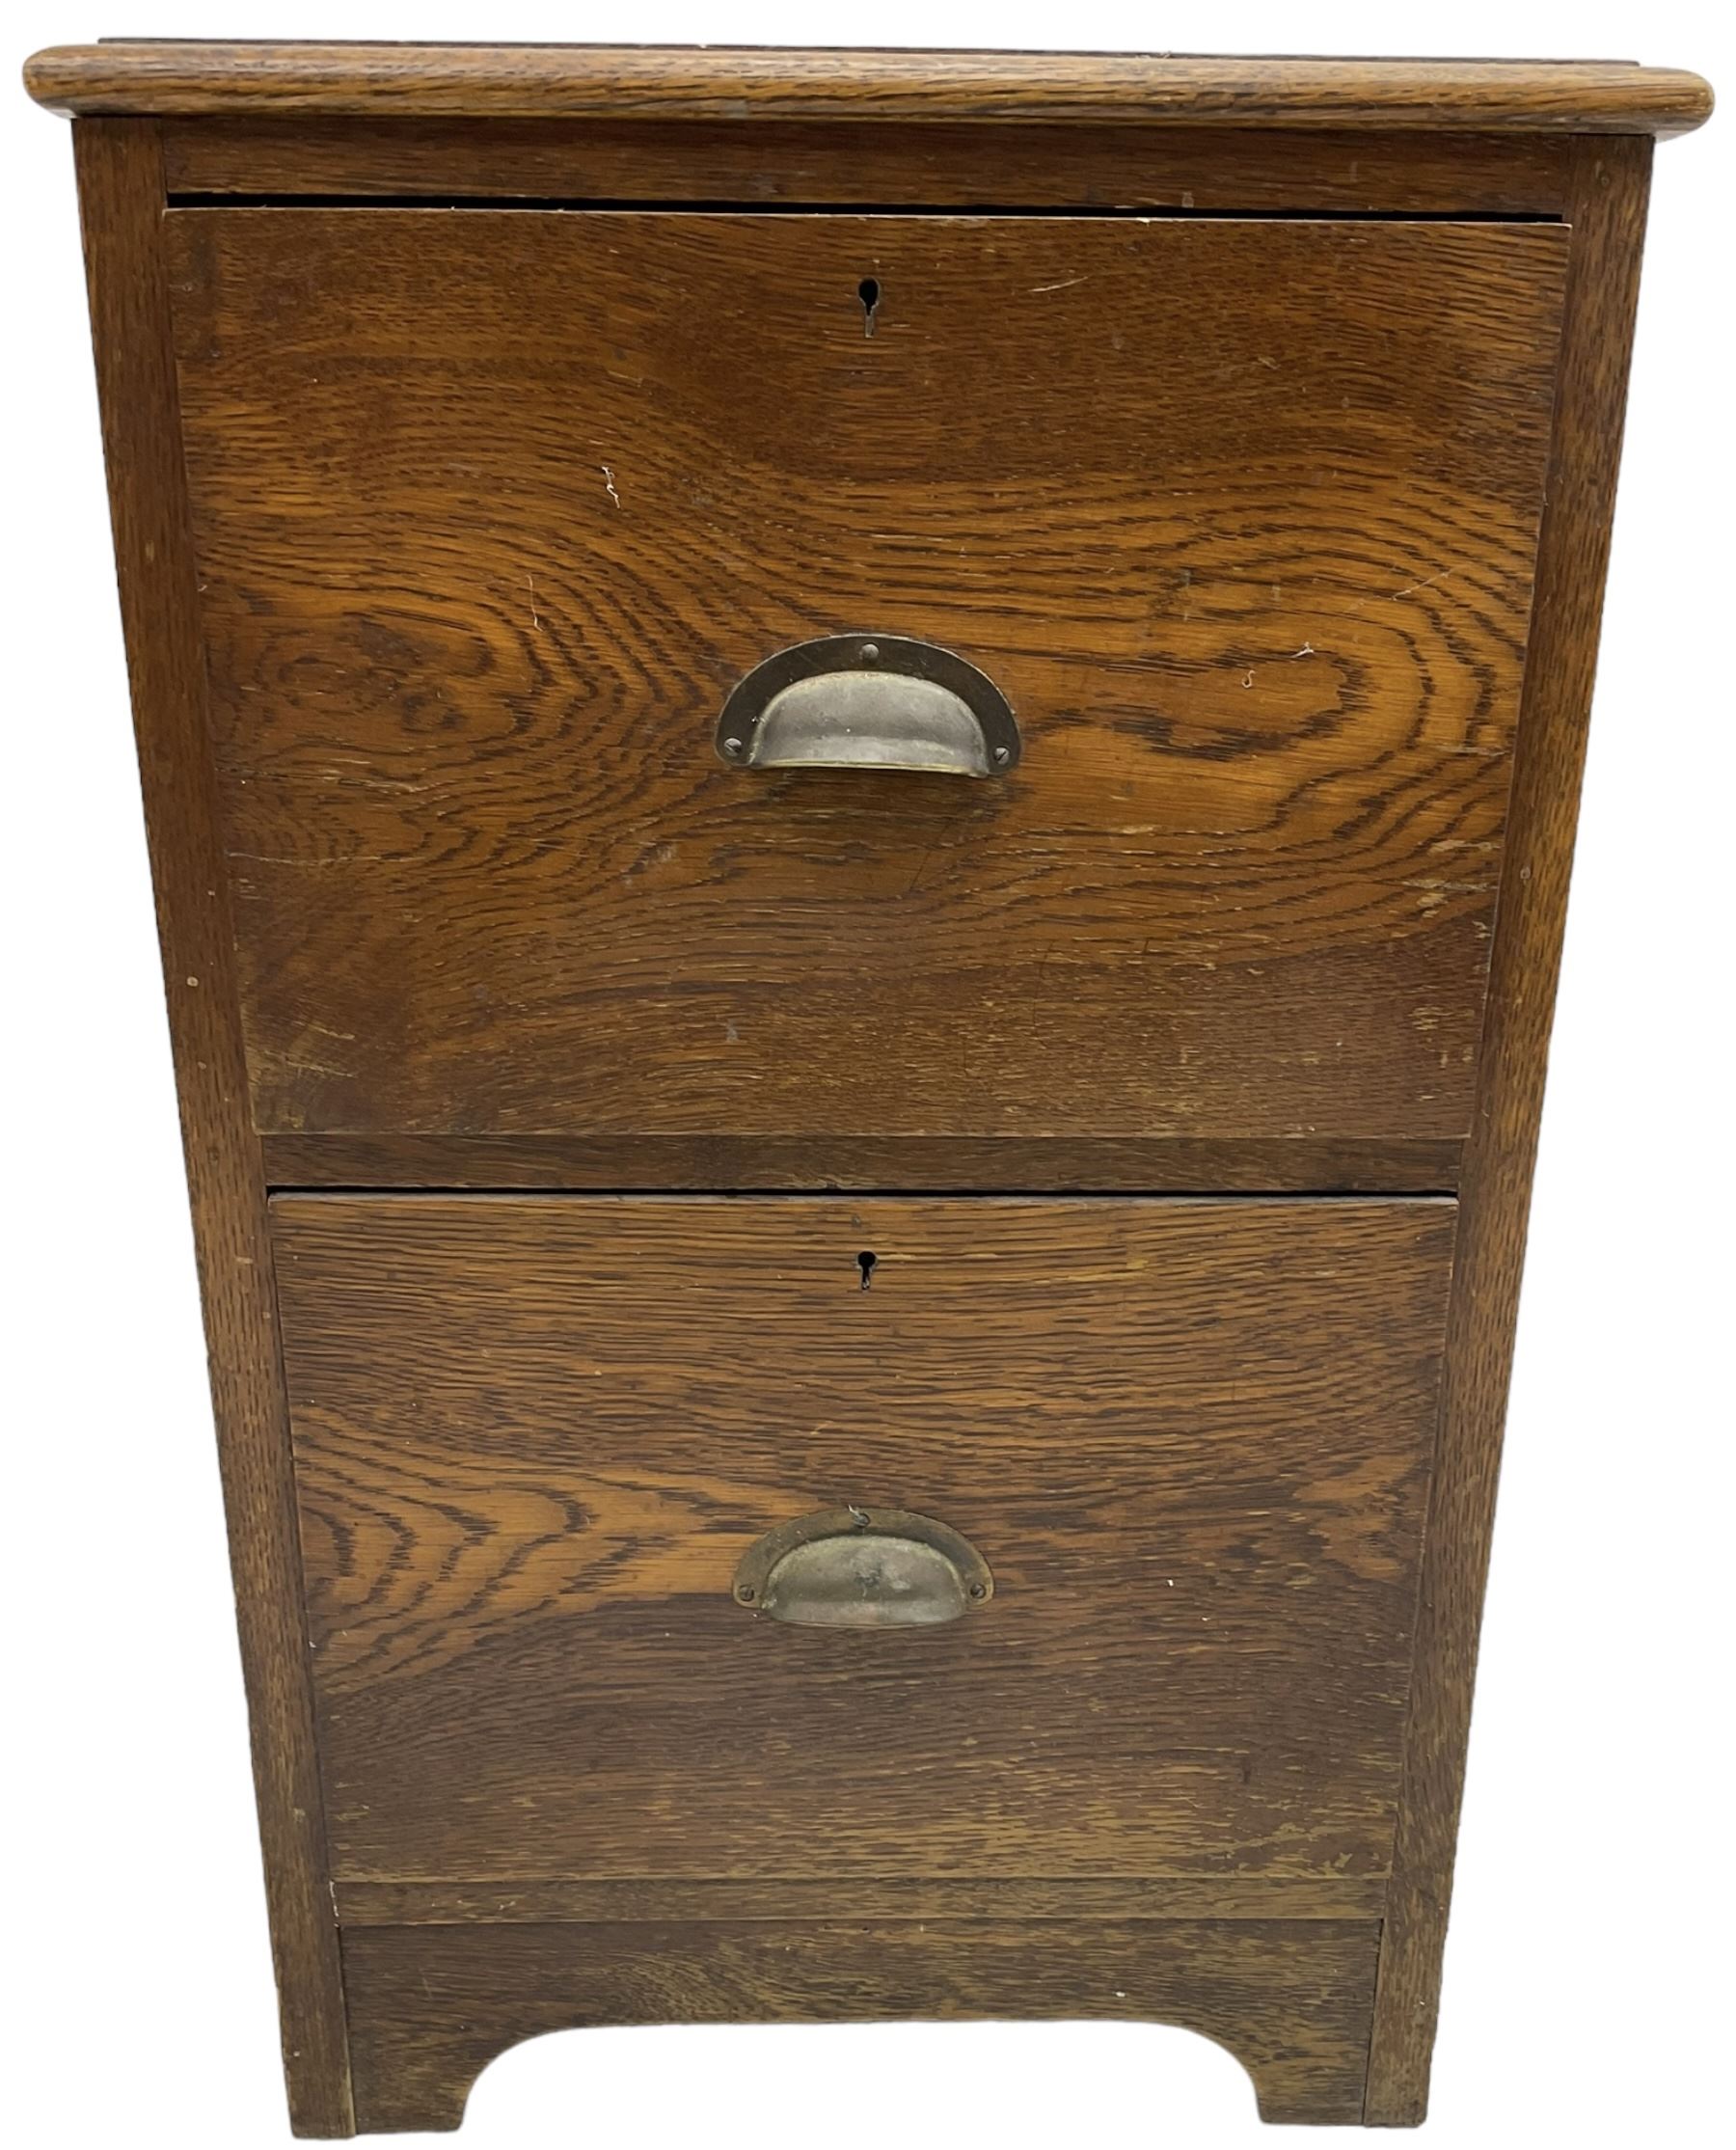 Early 20th century oak two drawer filing cabinet - Image 4 of 5